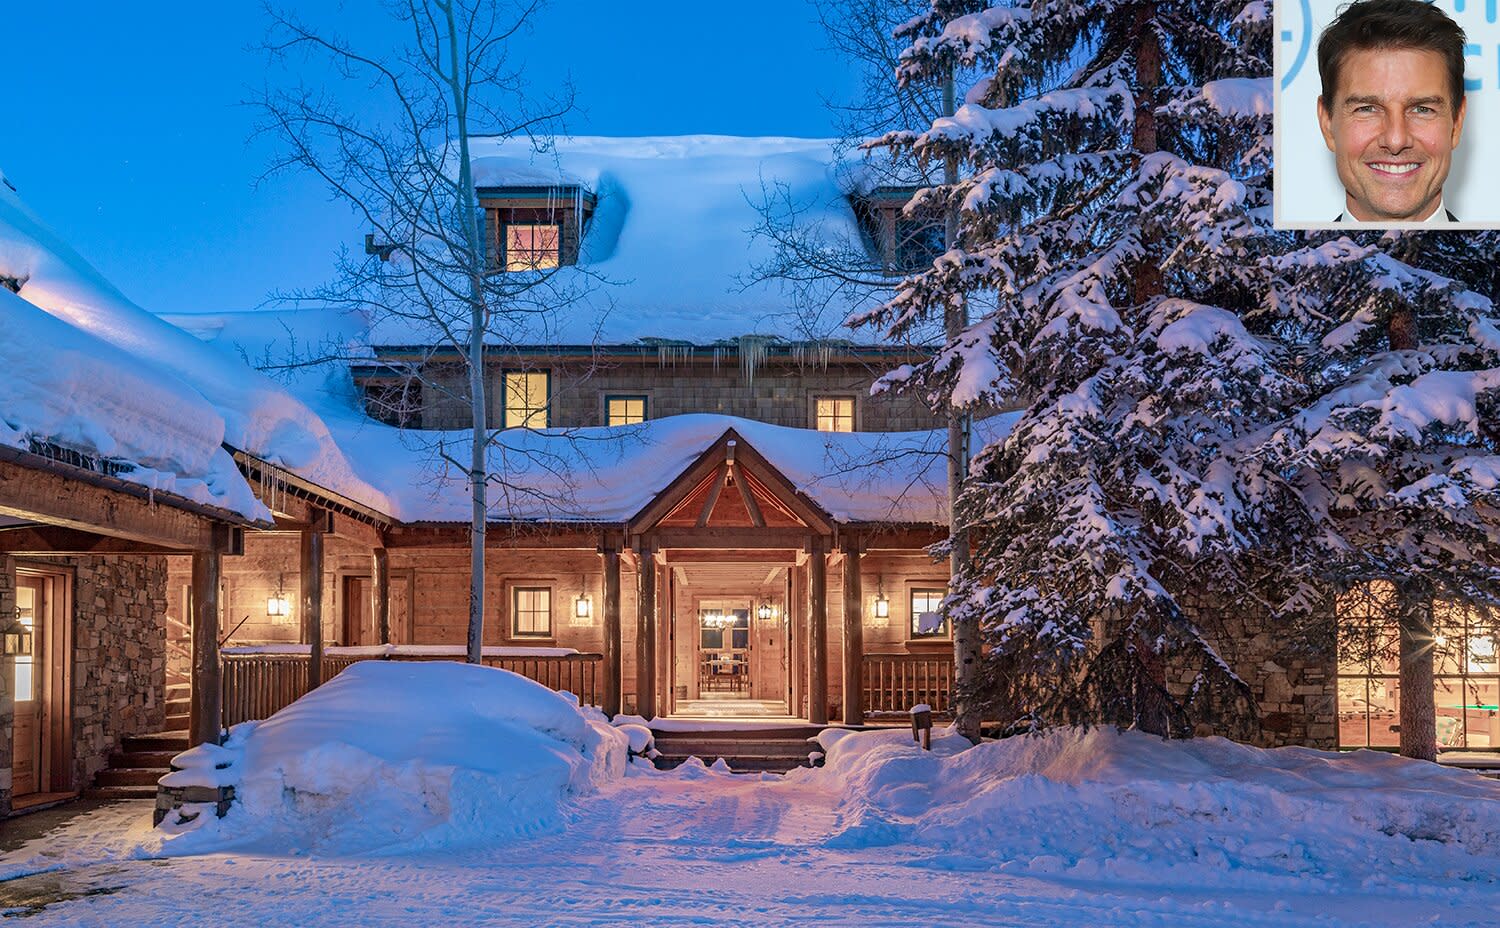 Tom Cruise Sells His Longtime Telluride Ranch for 39.5 Million — See